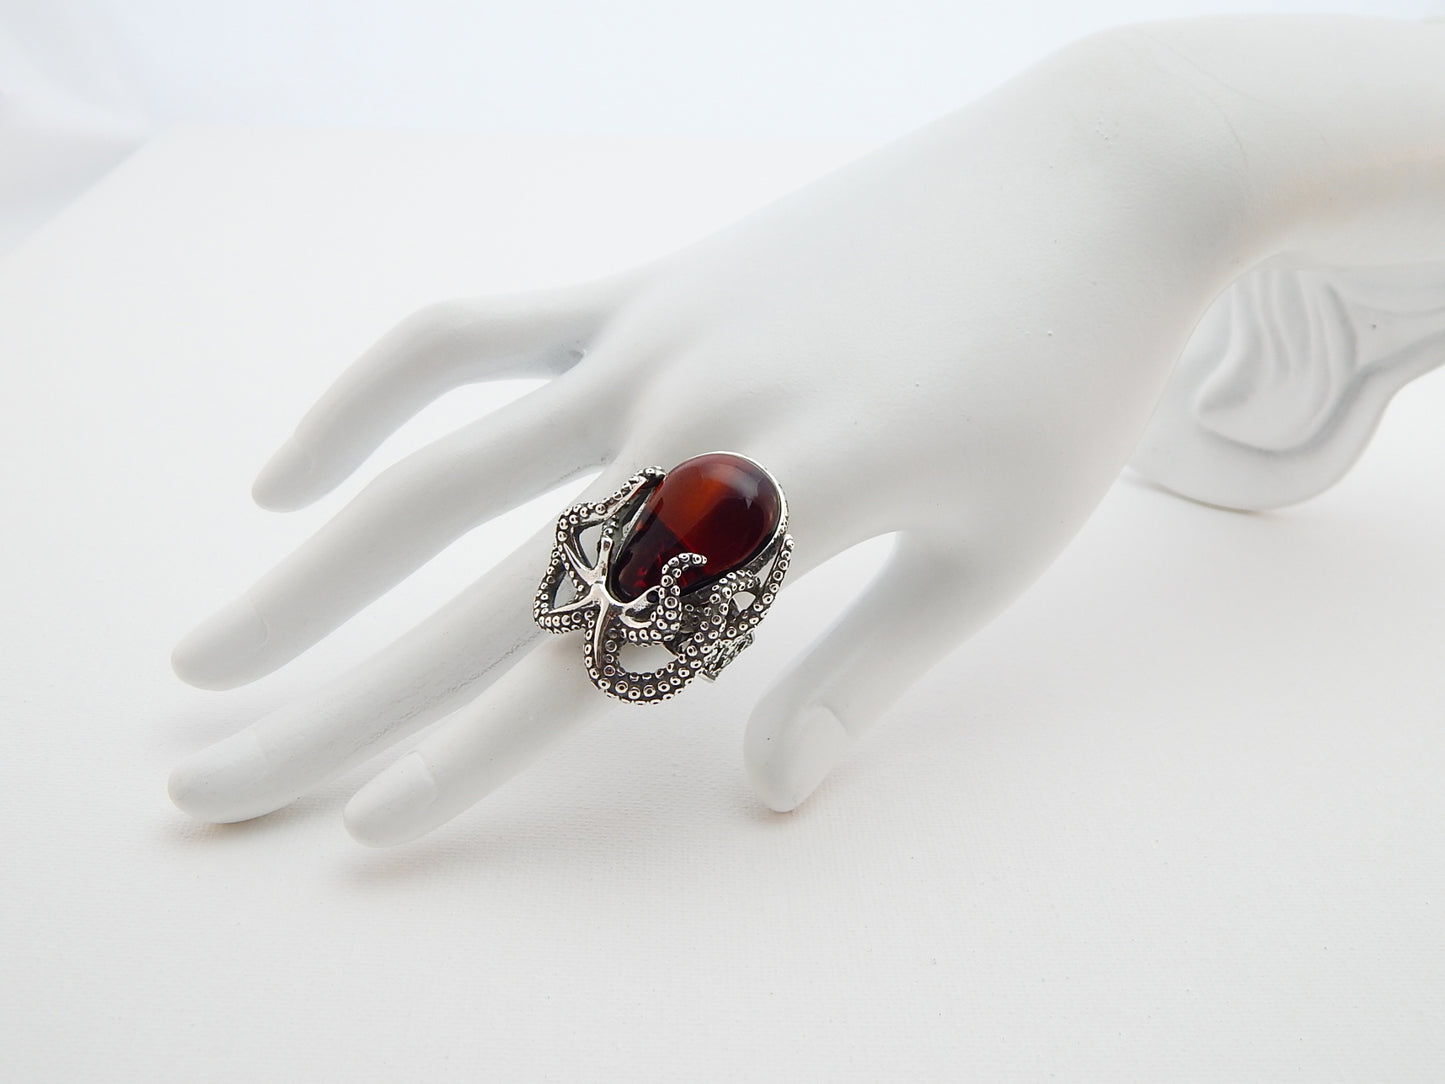 Natural Baltic Cherry Amber Adjustable Octopus Statement Ring in 925 Sterling Silver